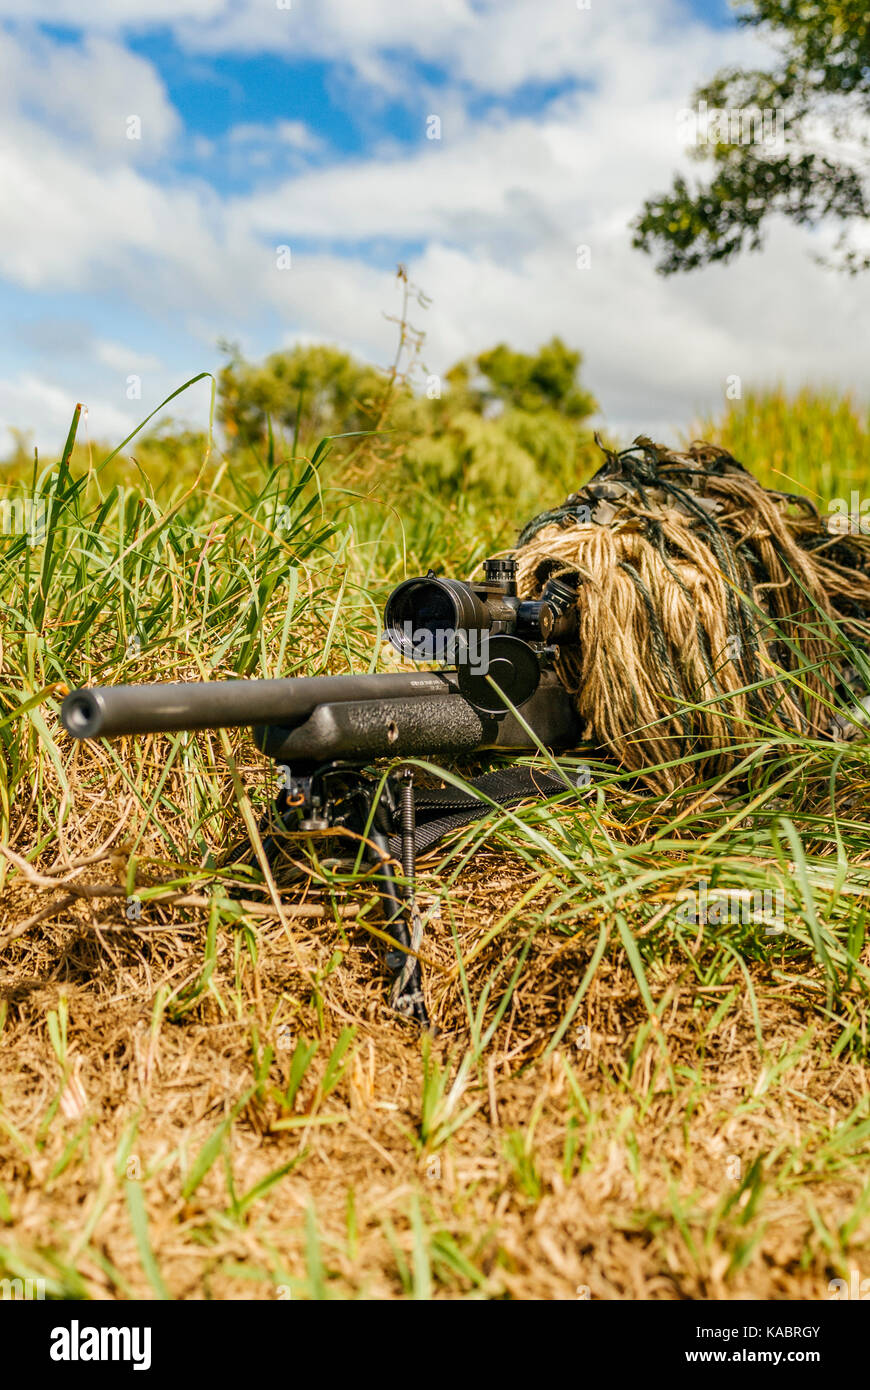 Police Swat Sniper In A Ghillie Suit Looking Through A Rifle Scope Surrounded By Dense